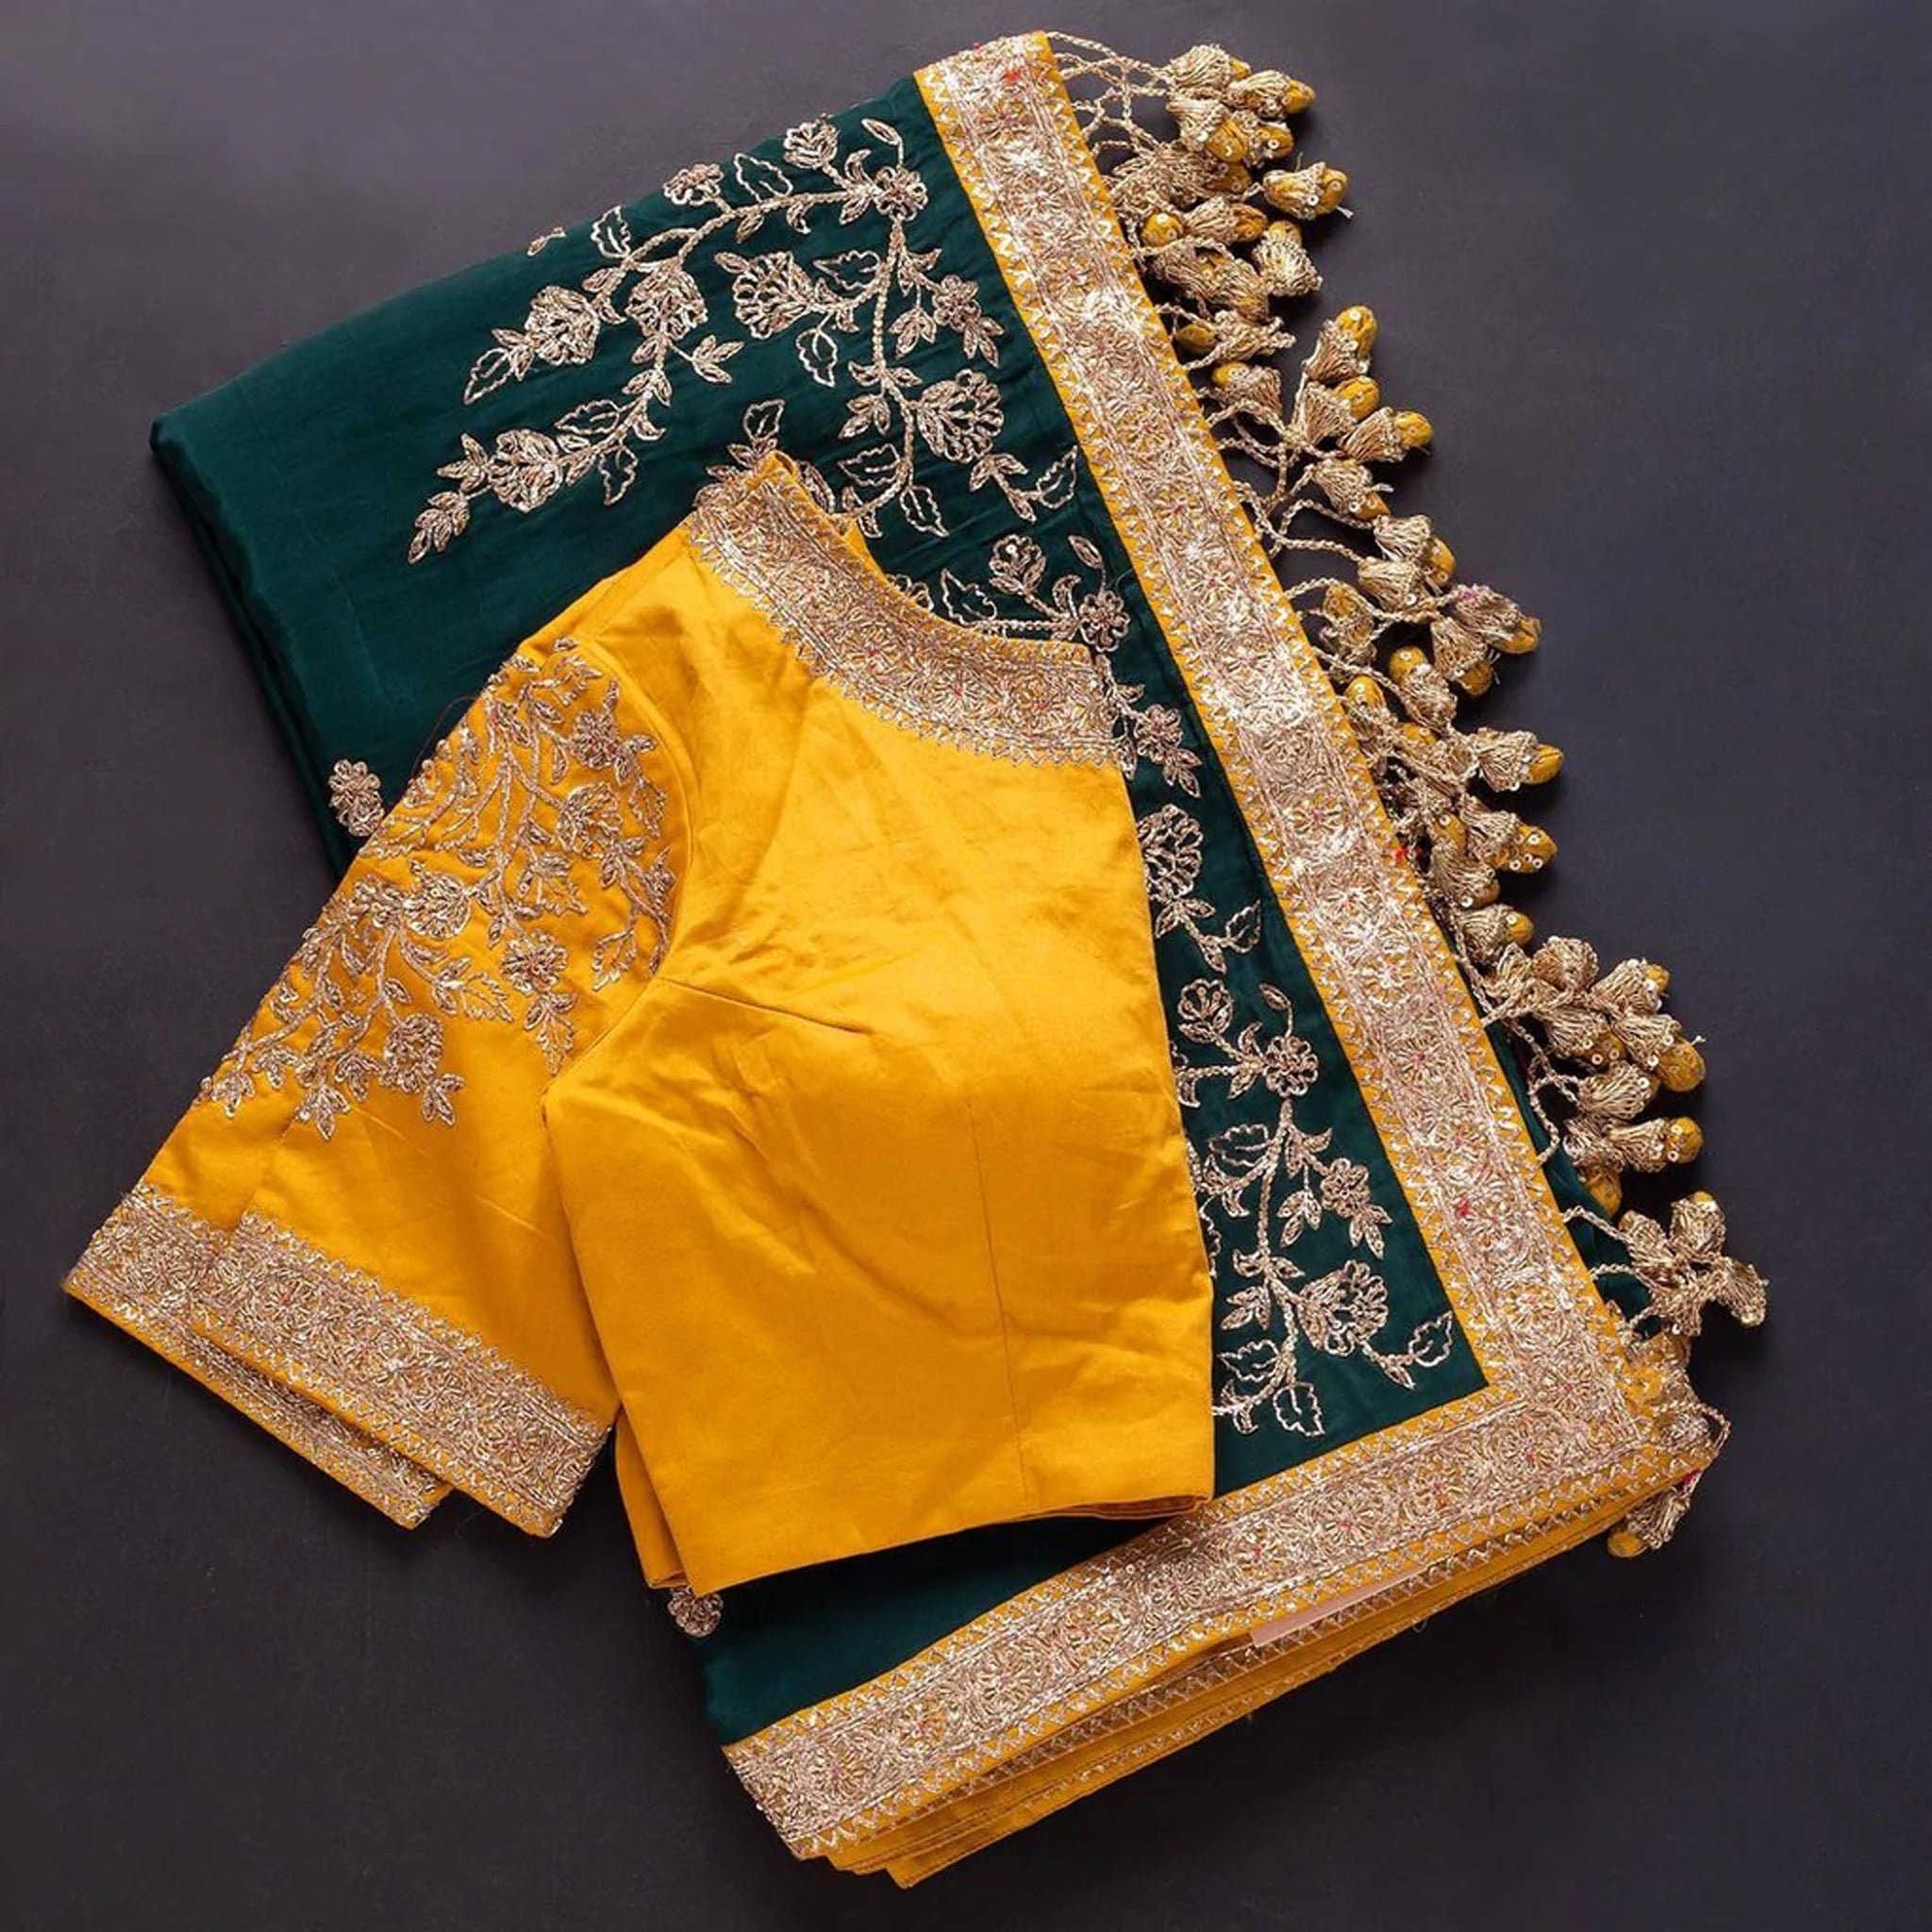 Green Silk saree and Yellow Blouse with Heavy Embroidery Work - Colorful Saree